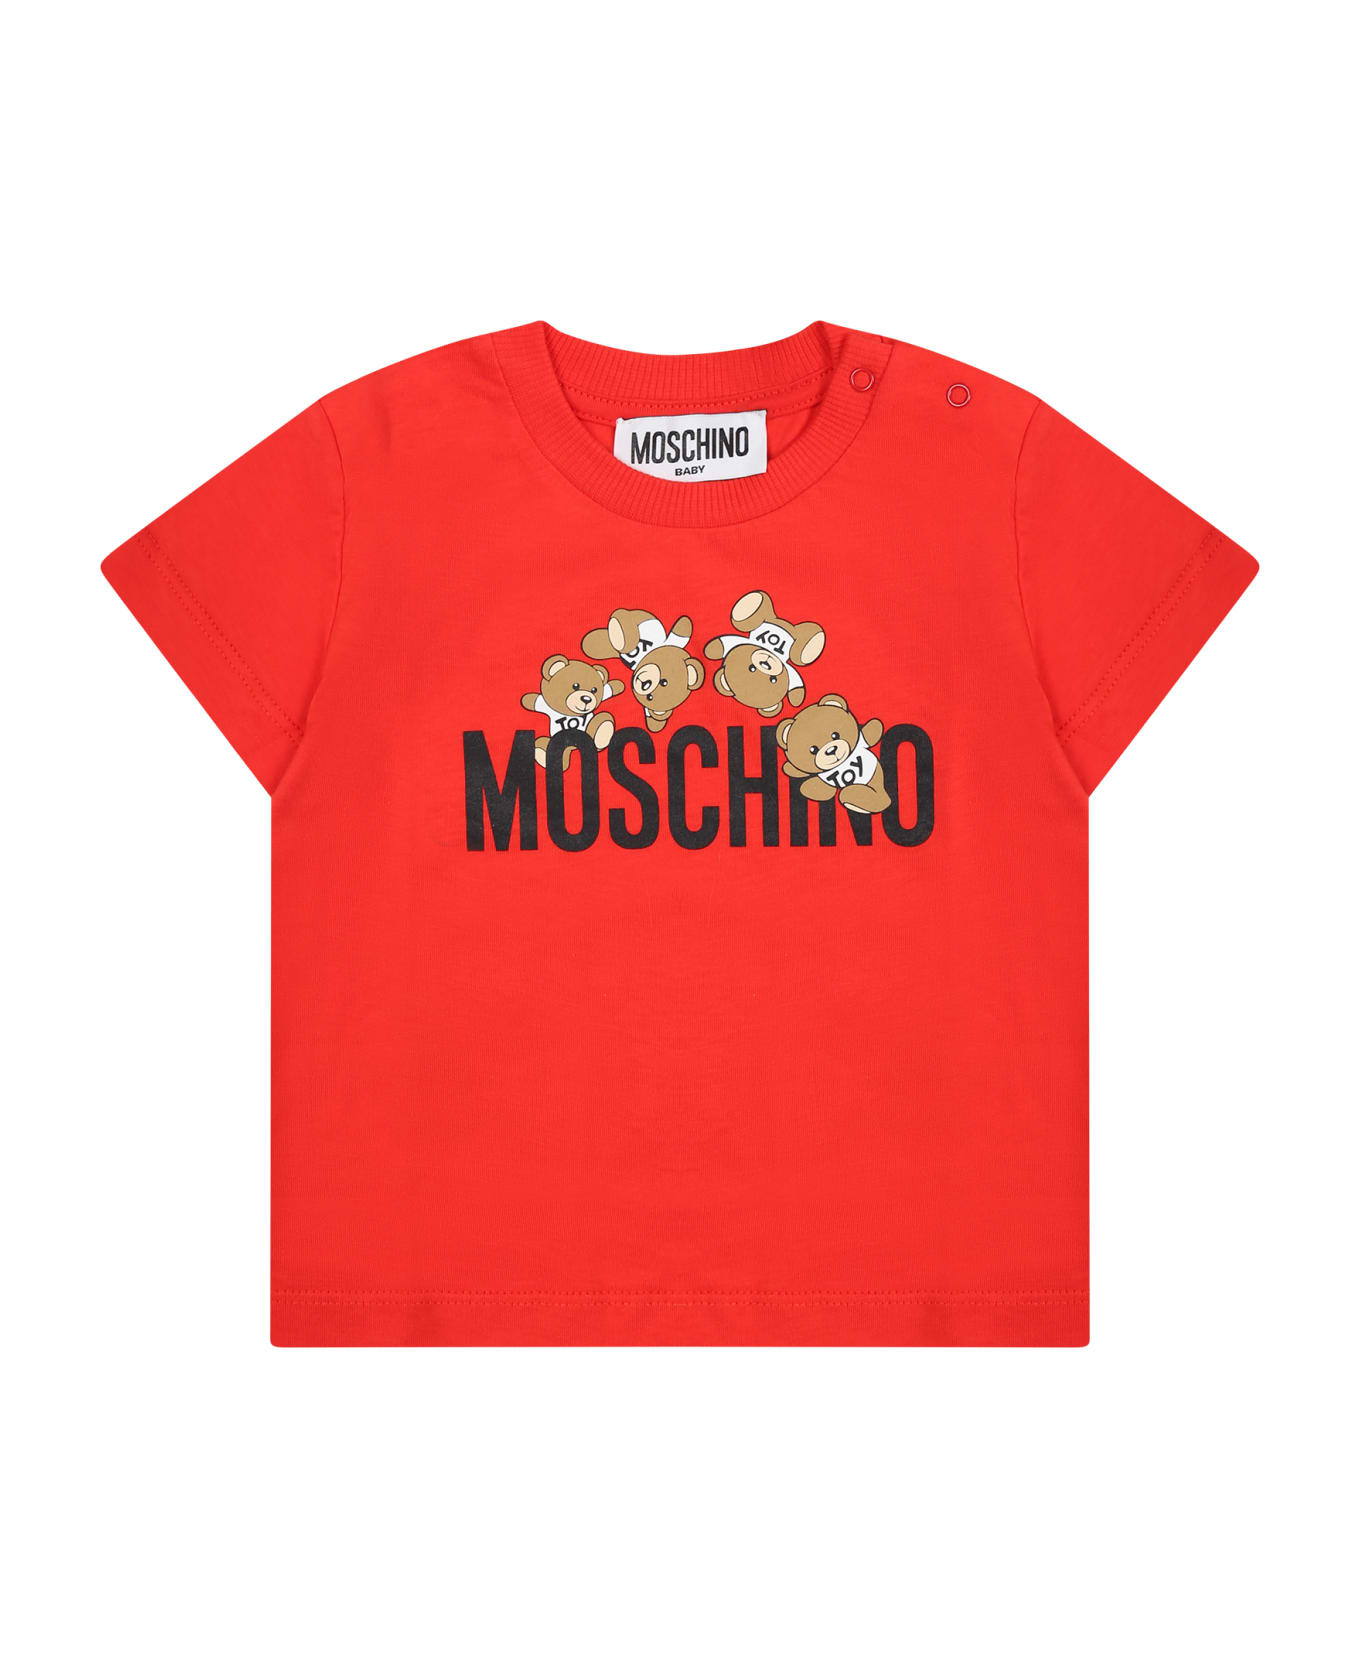 Moschino Red T-shirt For Baby Boy With Teddy Bears - Red